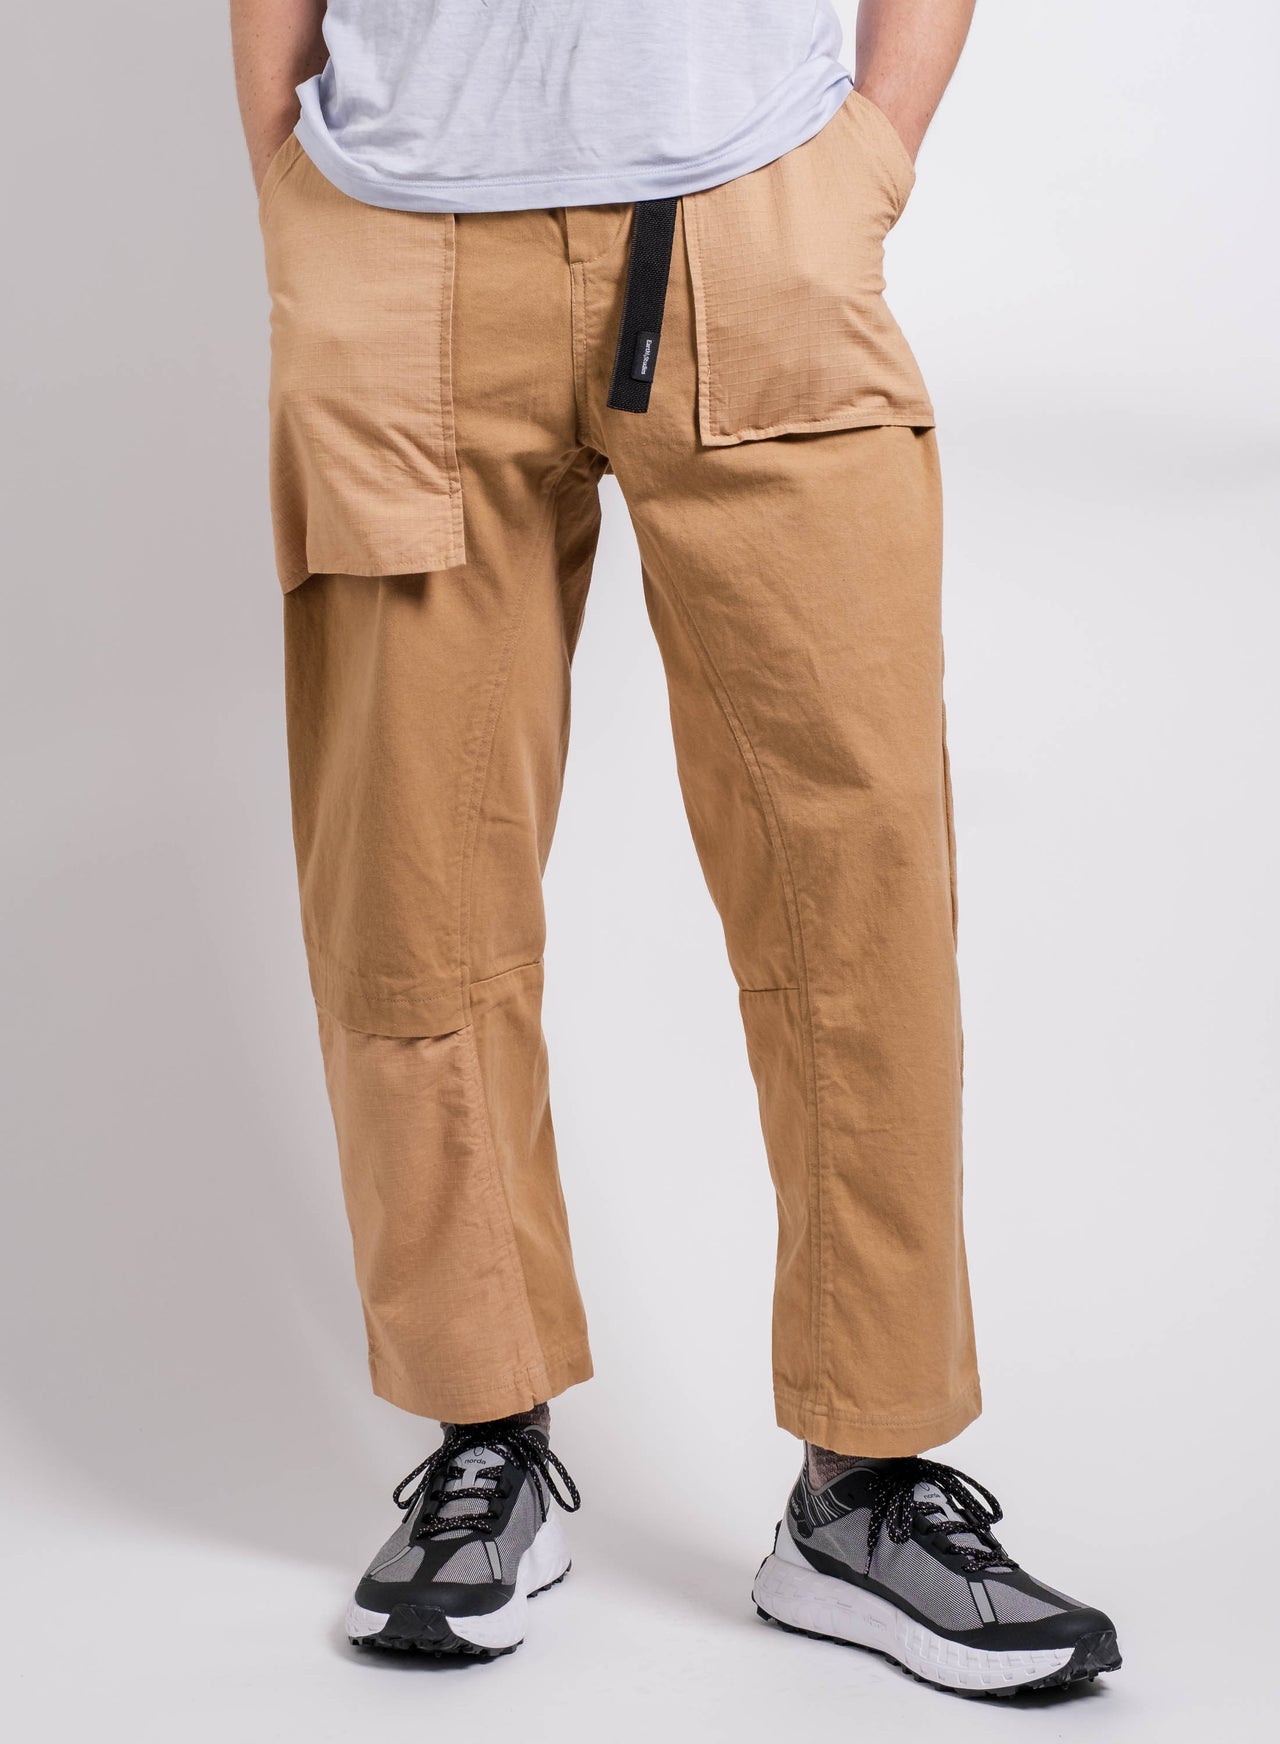 MP-103 Field Pant in Entrada